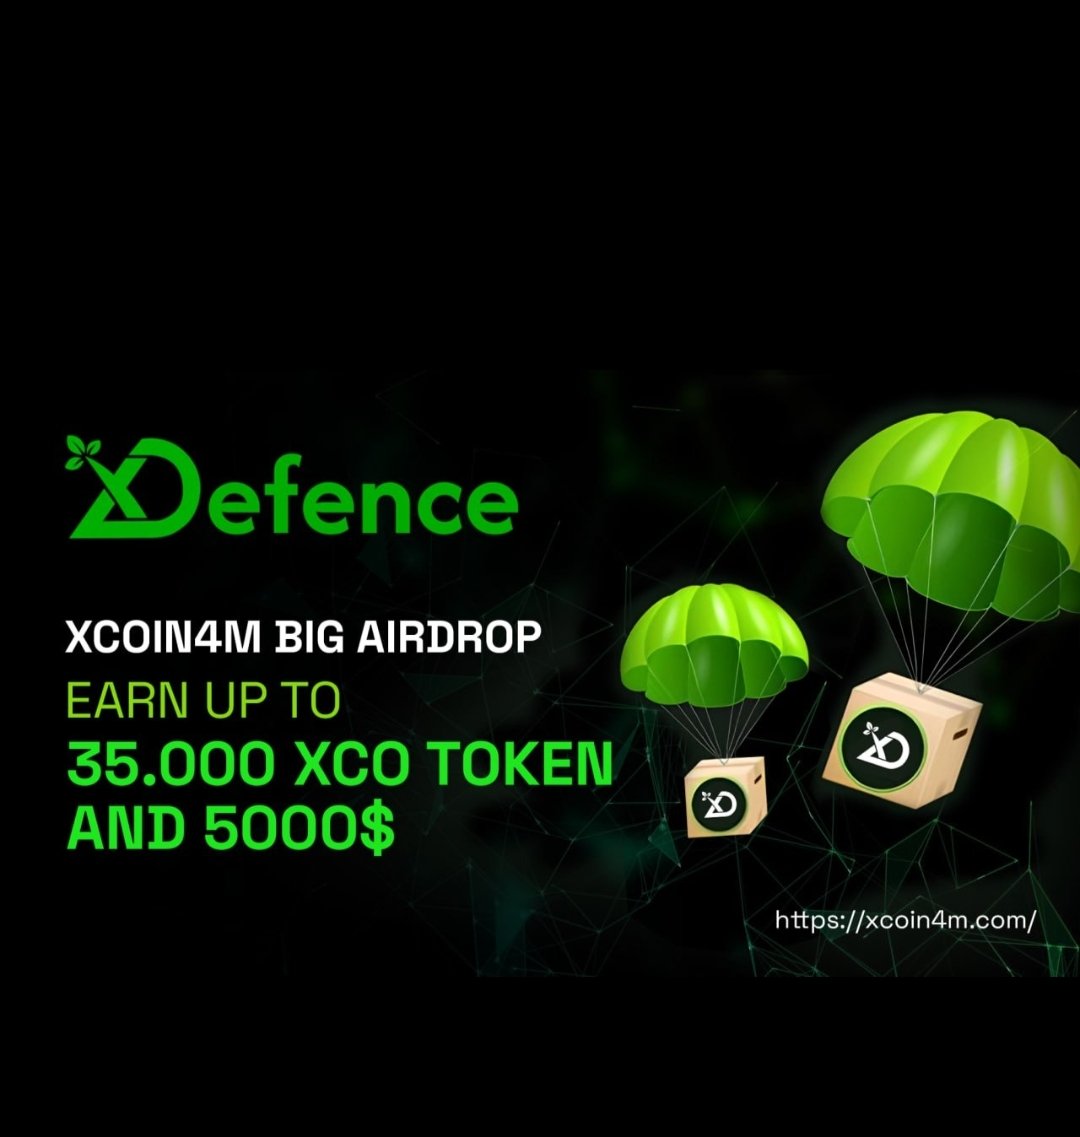 🚀XCOIN4M BIG AIRDROP - EARN UP TO 35.000 XCO token and 5000$ 

🎁 Reward: 35.000 XCO token and 5000$ 

🎮 How to join: 
t.me/XdefenceGuaran…

🤒  Are you ready to hunt for prizes of 35.000 XCO tokens and 5000$ 
 tokens?

Bravo, team! 🔥